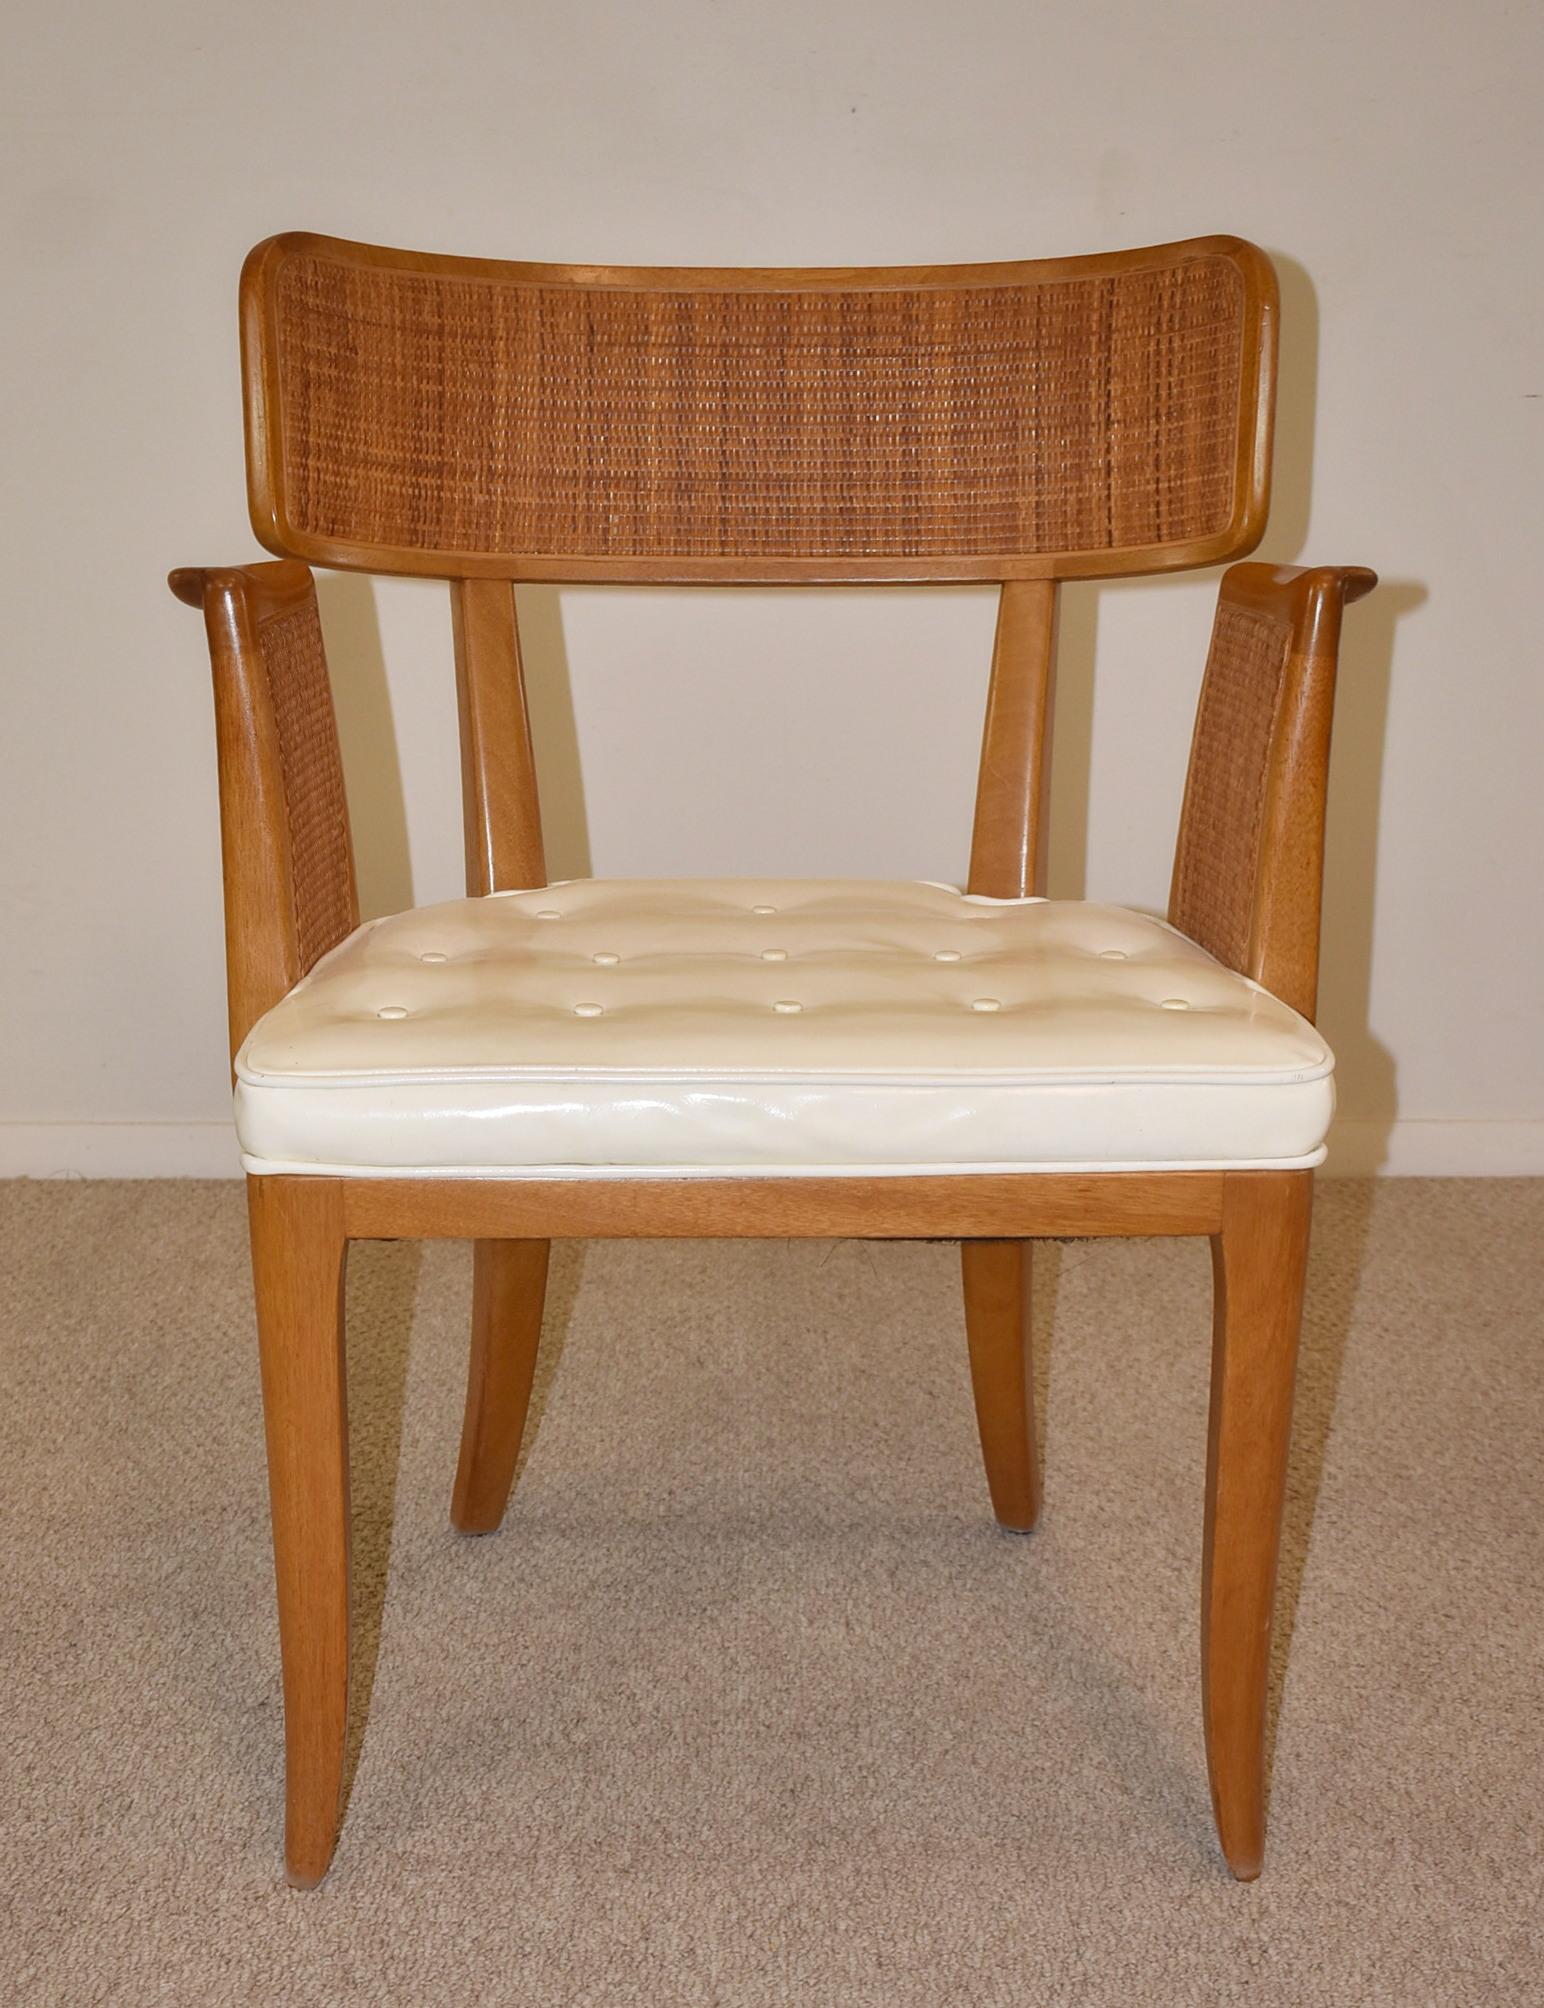 Six Vintage Dunbar Dining Chairs Cane Back Edward Wormley Design, circa 1950's For Sale 4